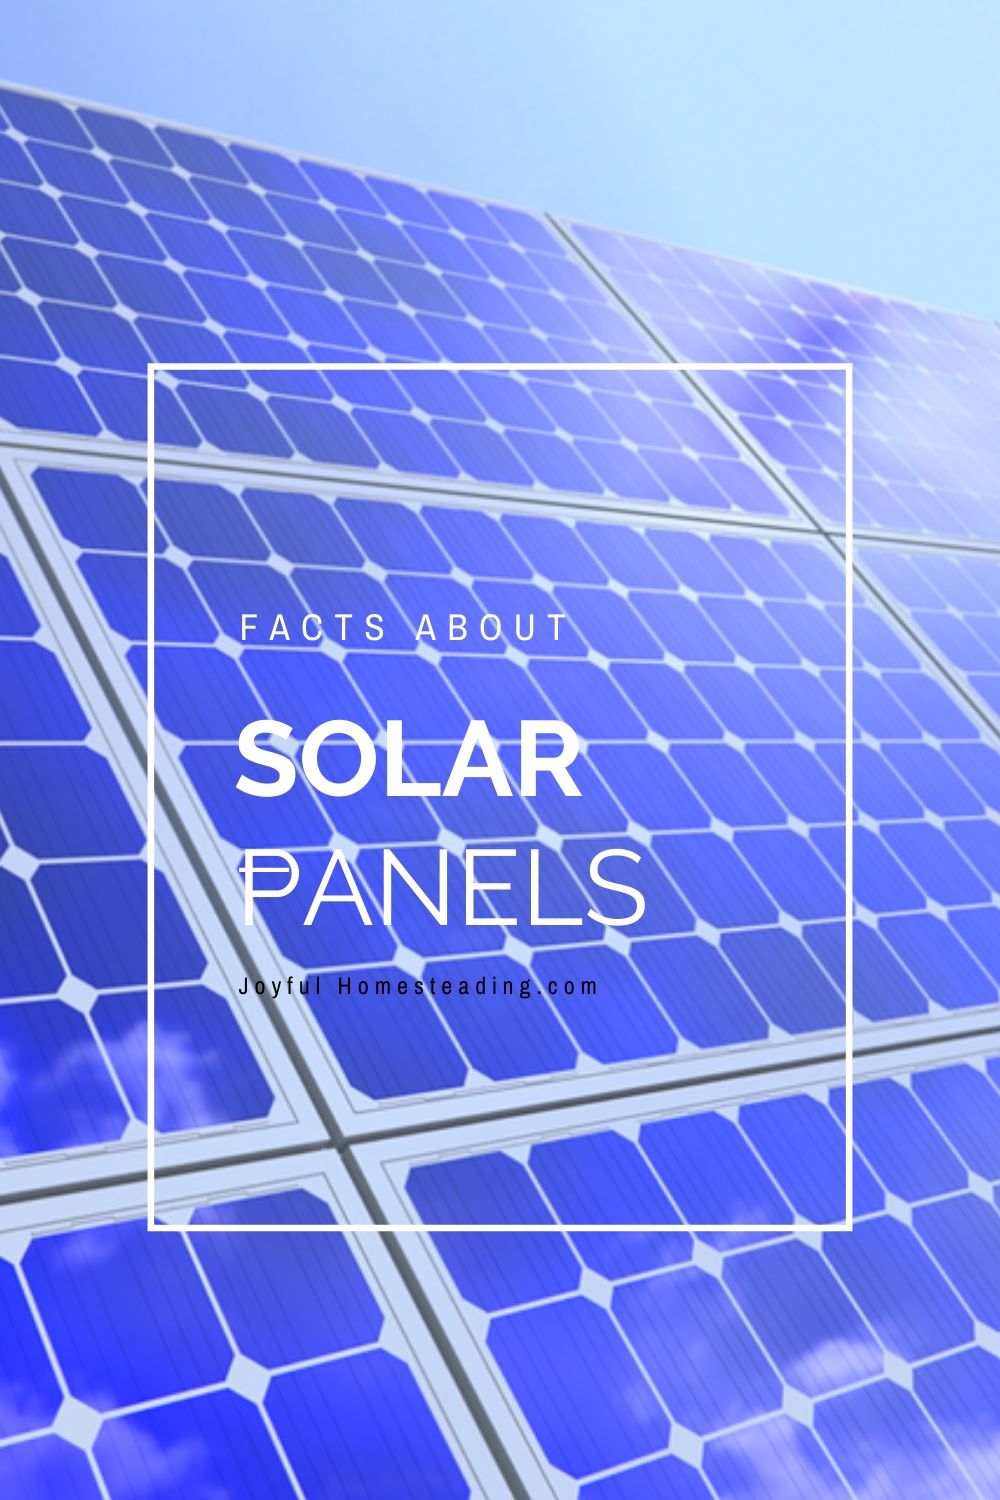 Facts About Solar Panels